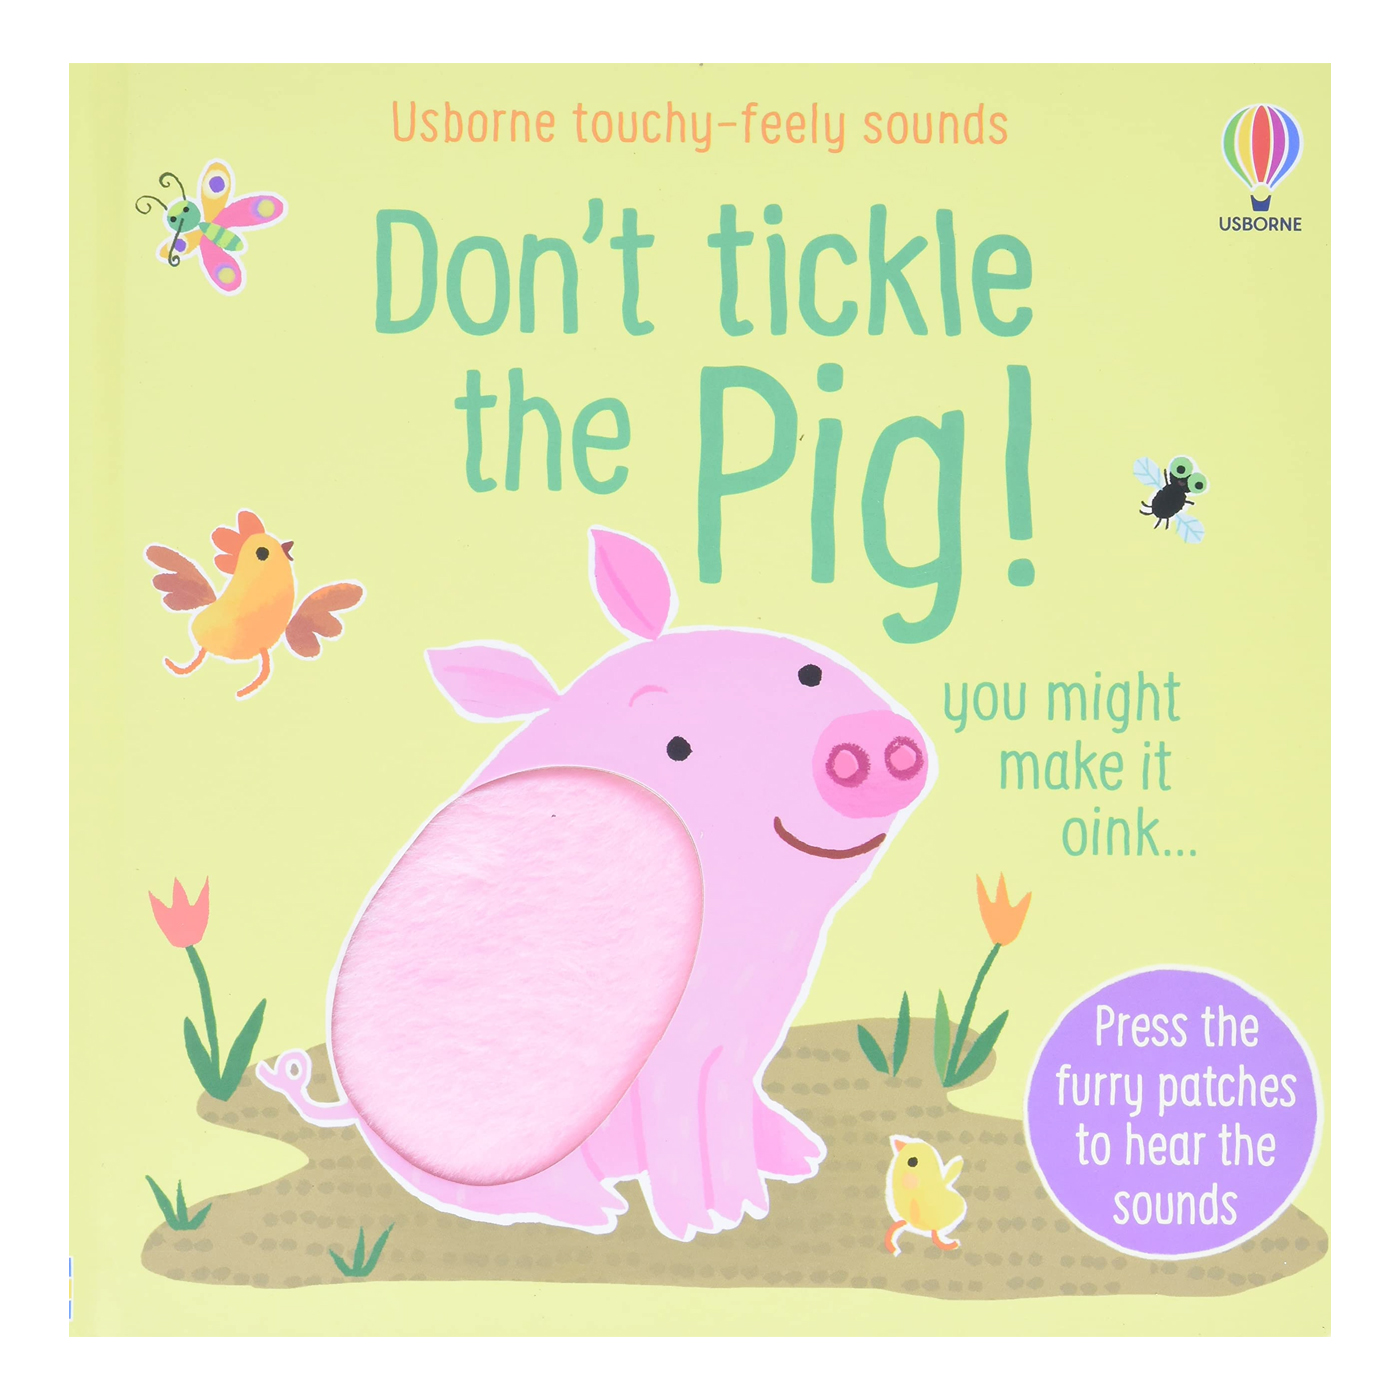  Don't Tickle the Pig!